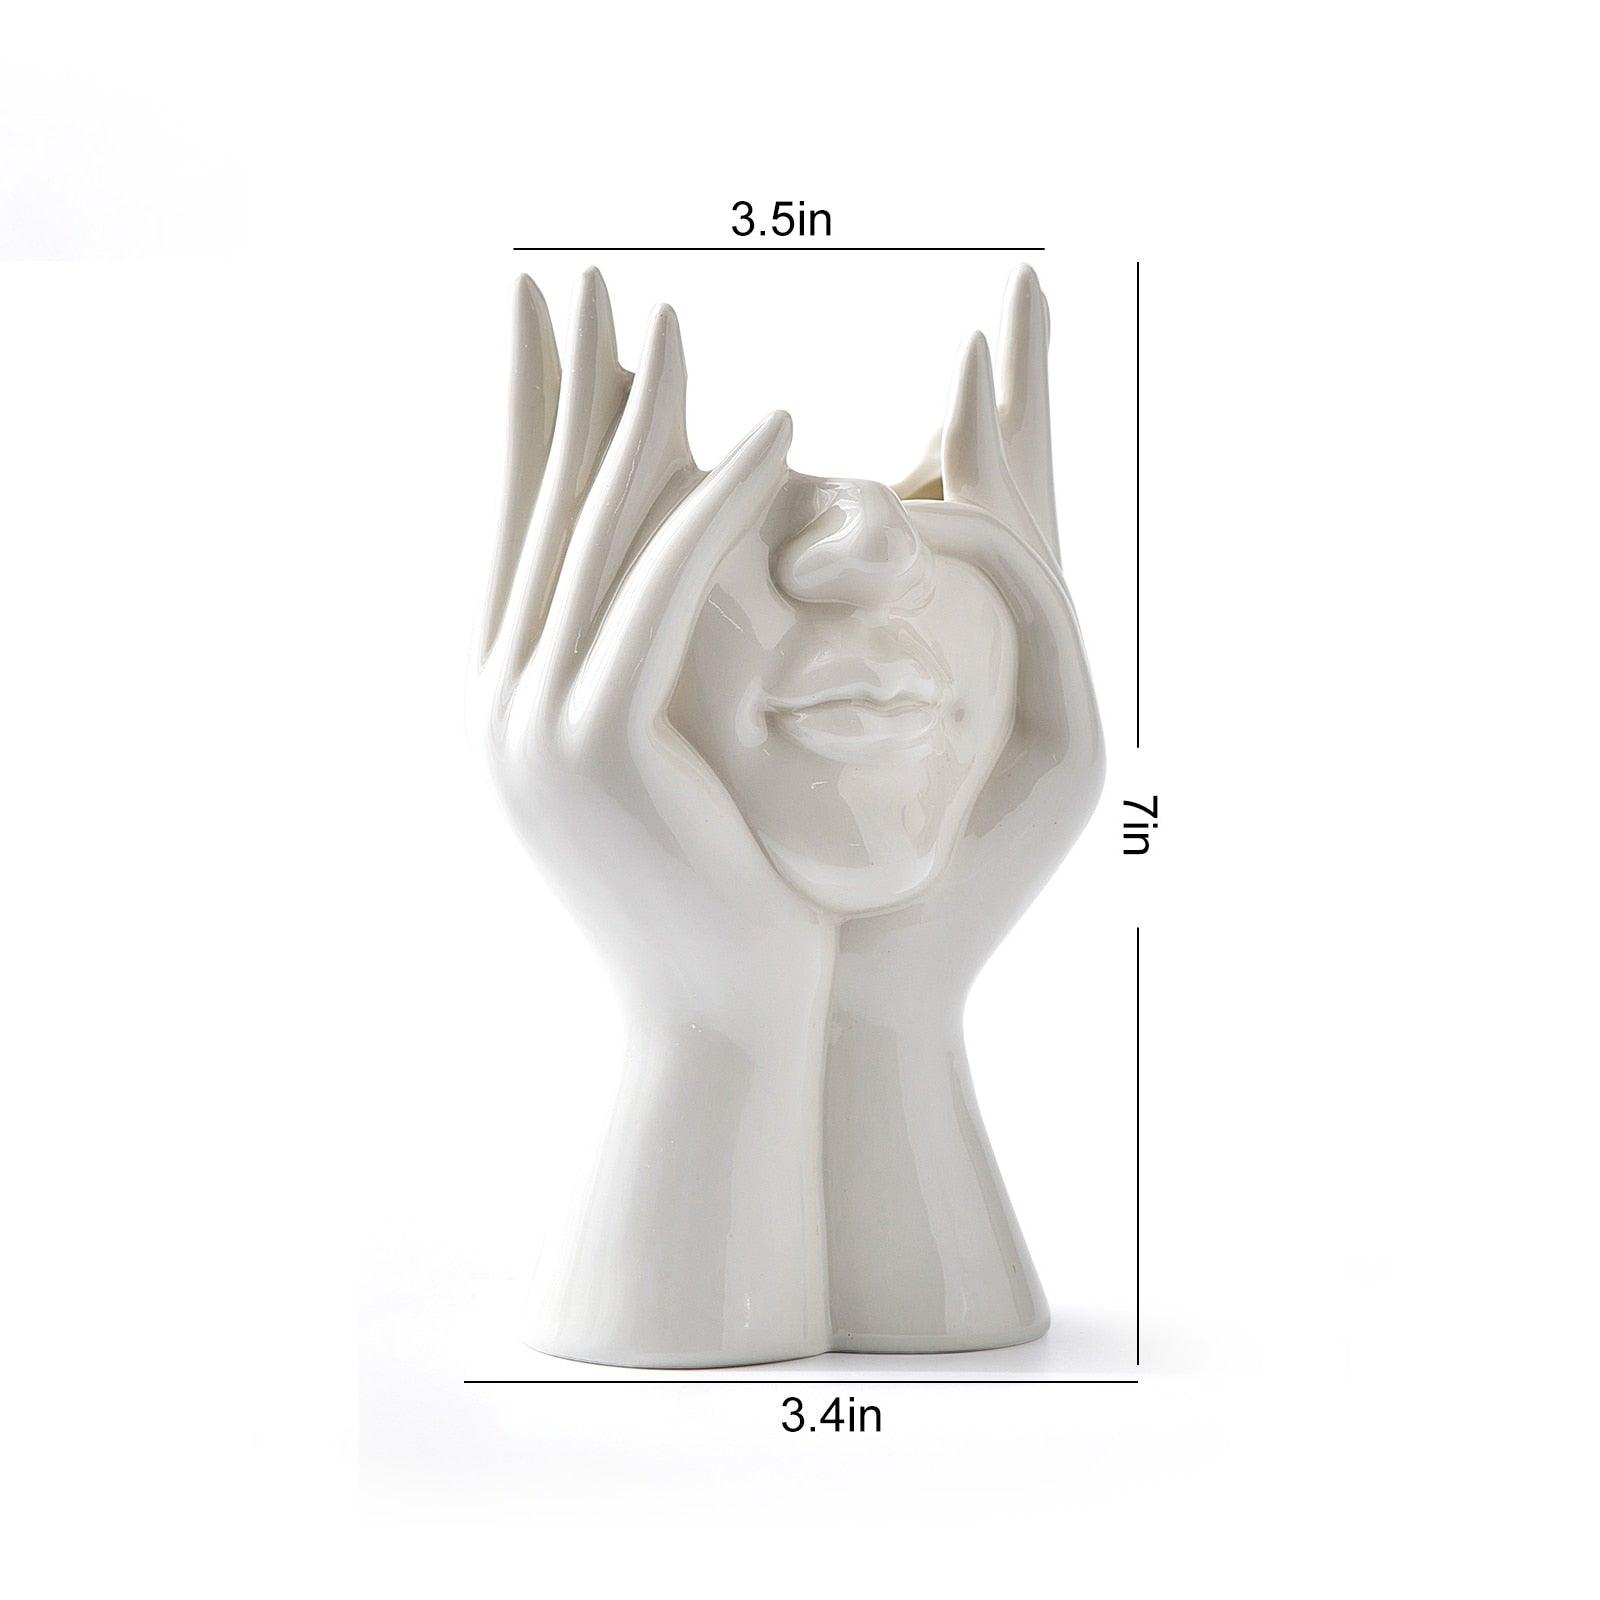 Shop 0 Height 17.7cm 7in Decoration desk accessories human face statue ceramic vase figurines for interior Figurine room decor statues and sculptures Mademoiselle Home Decor